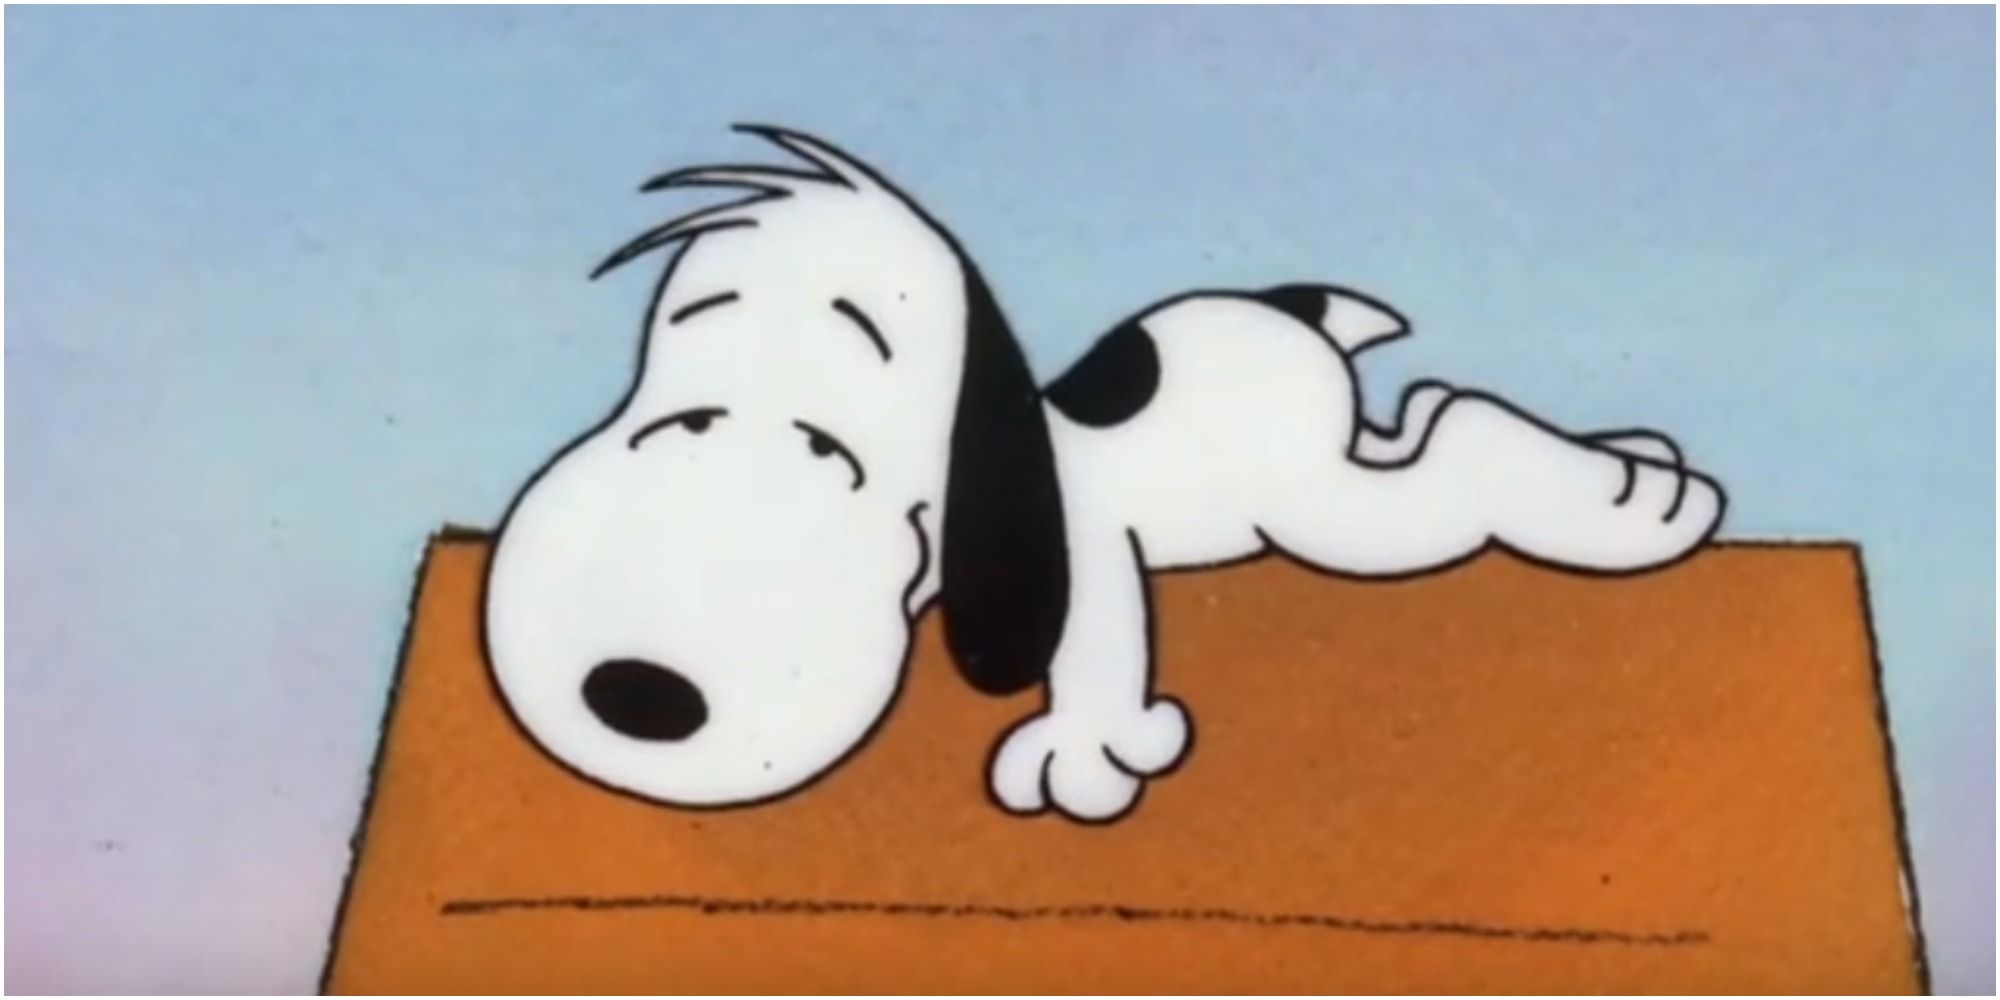 Snoopy 10 Most Memorable Appearances Ranked